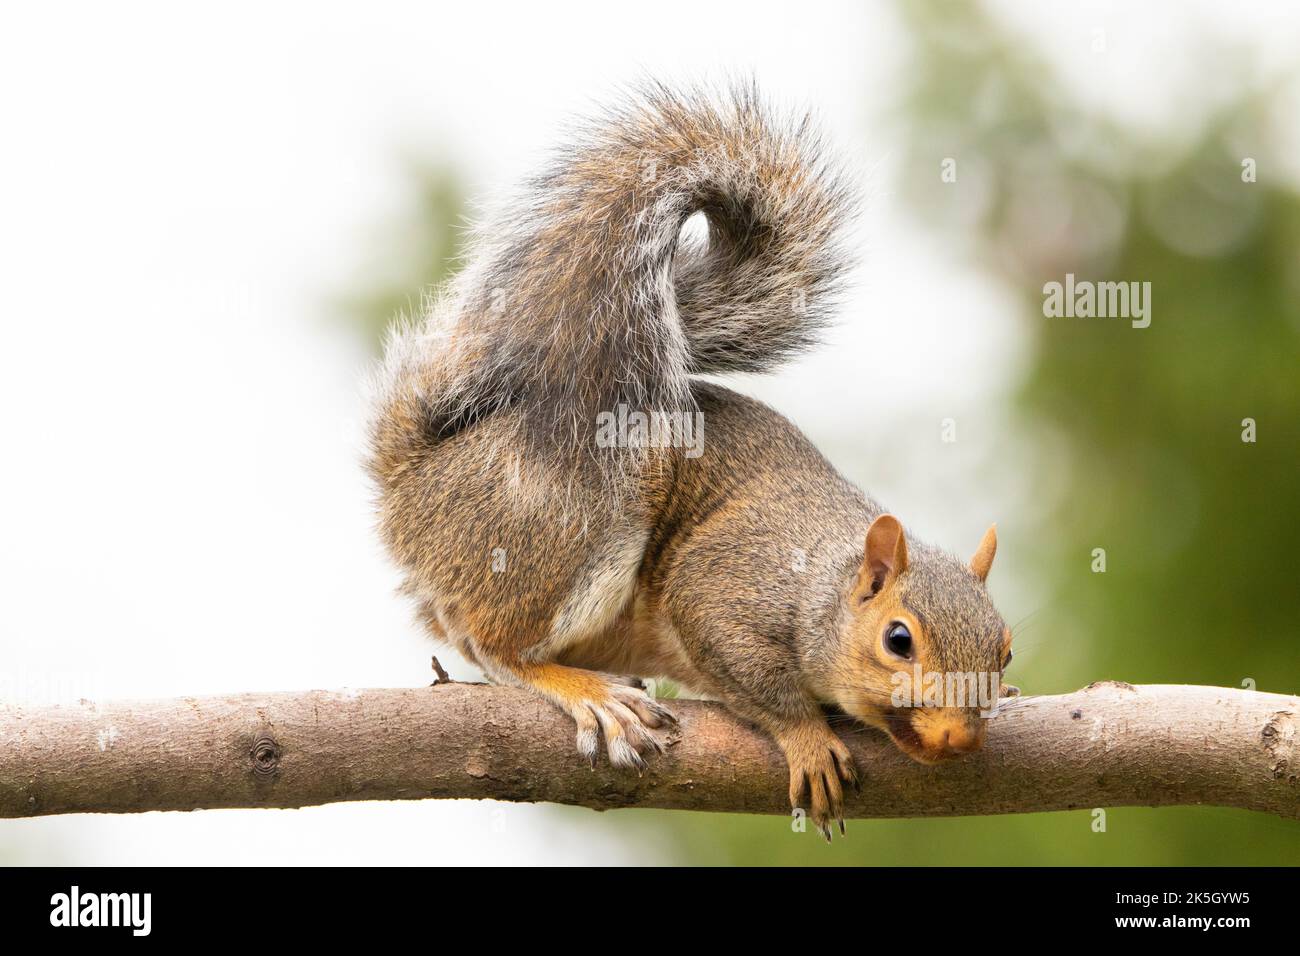 Grey Squirrel, perched on a branch / feeder UK 2022 Stock Photo